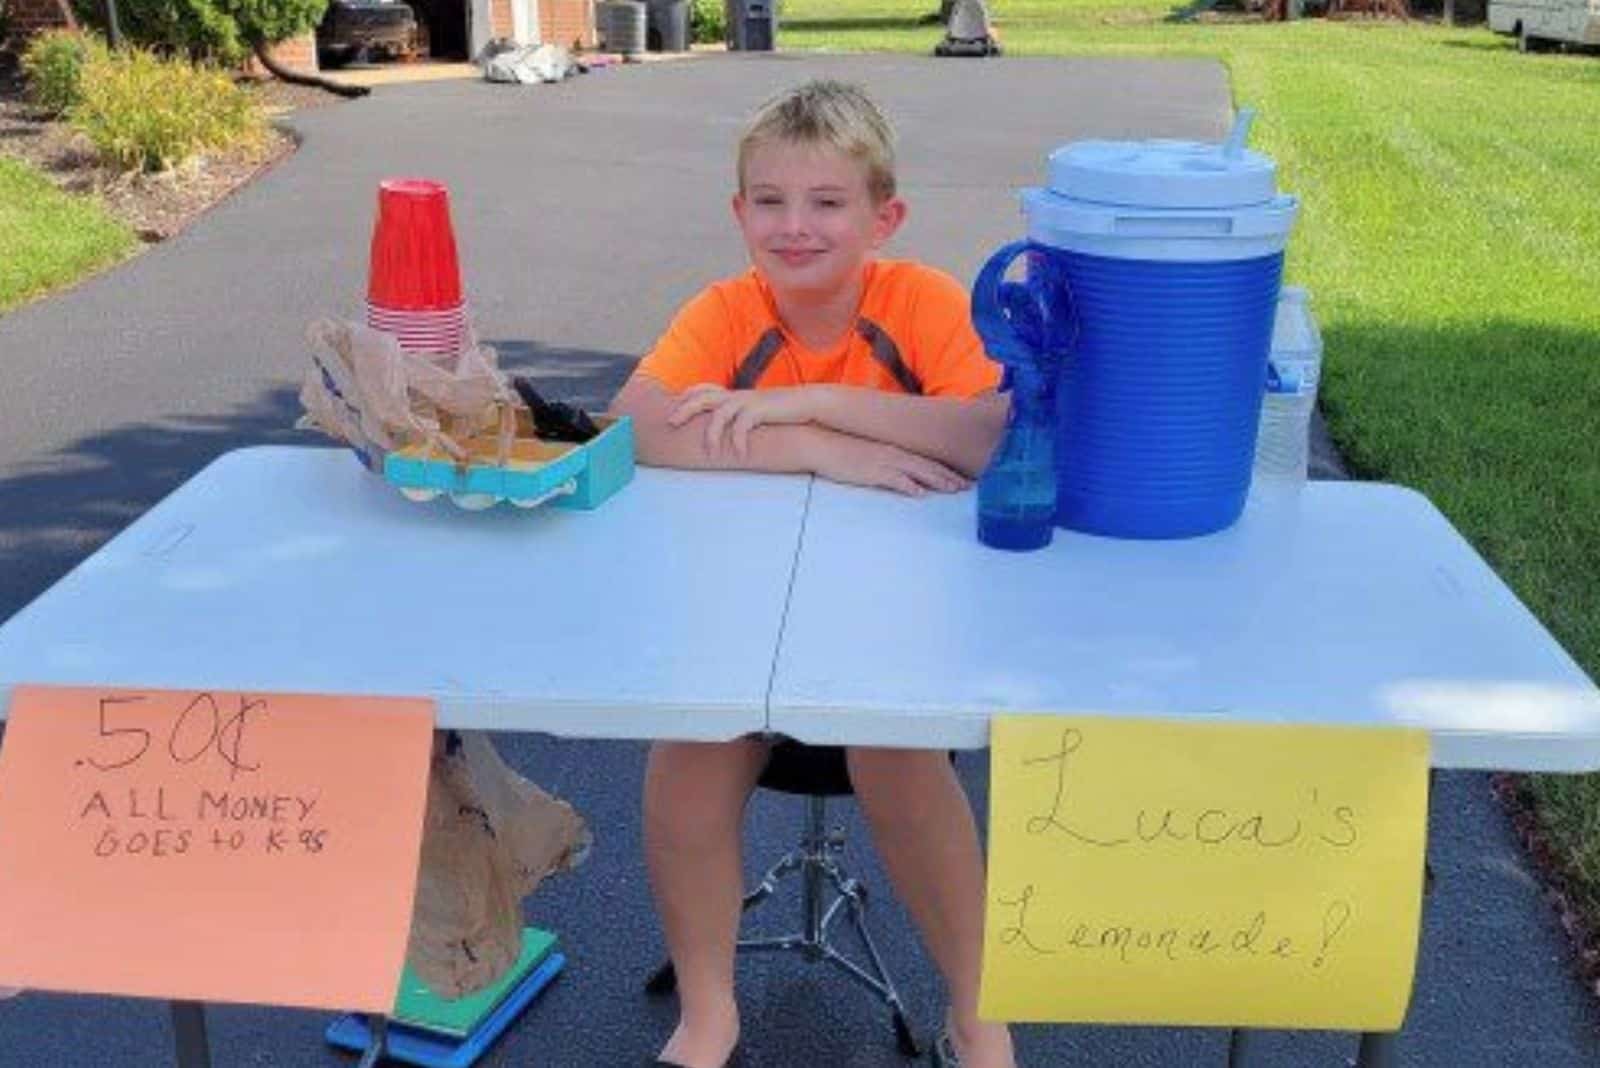 the boy at the stand sells lemonade